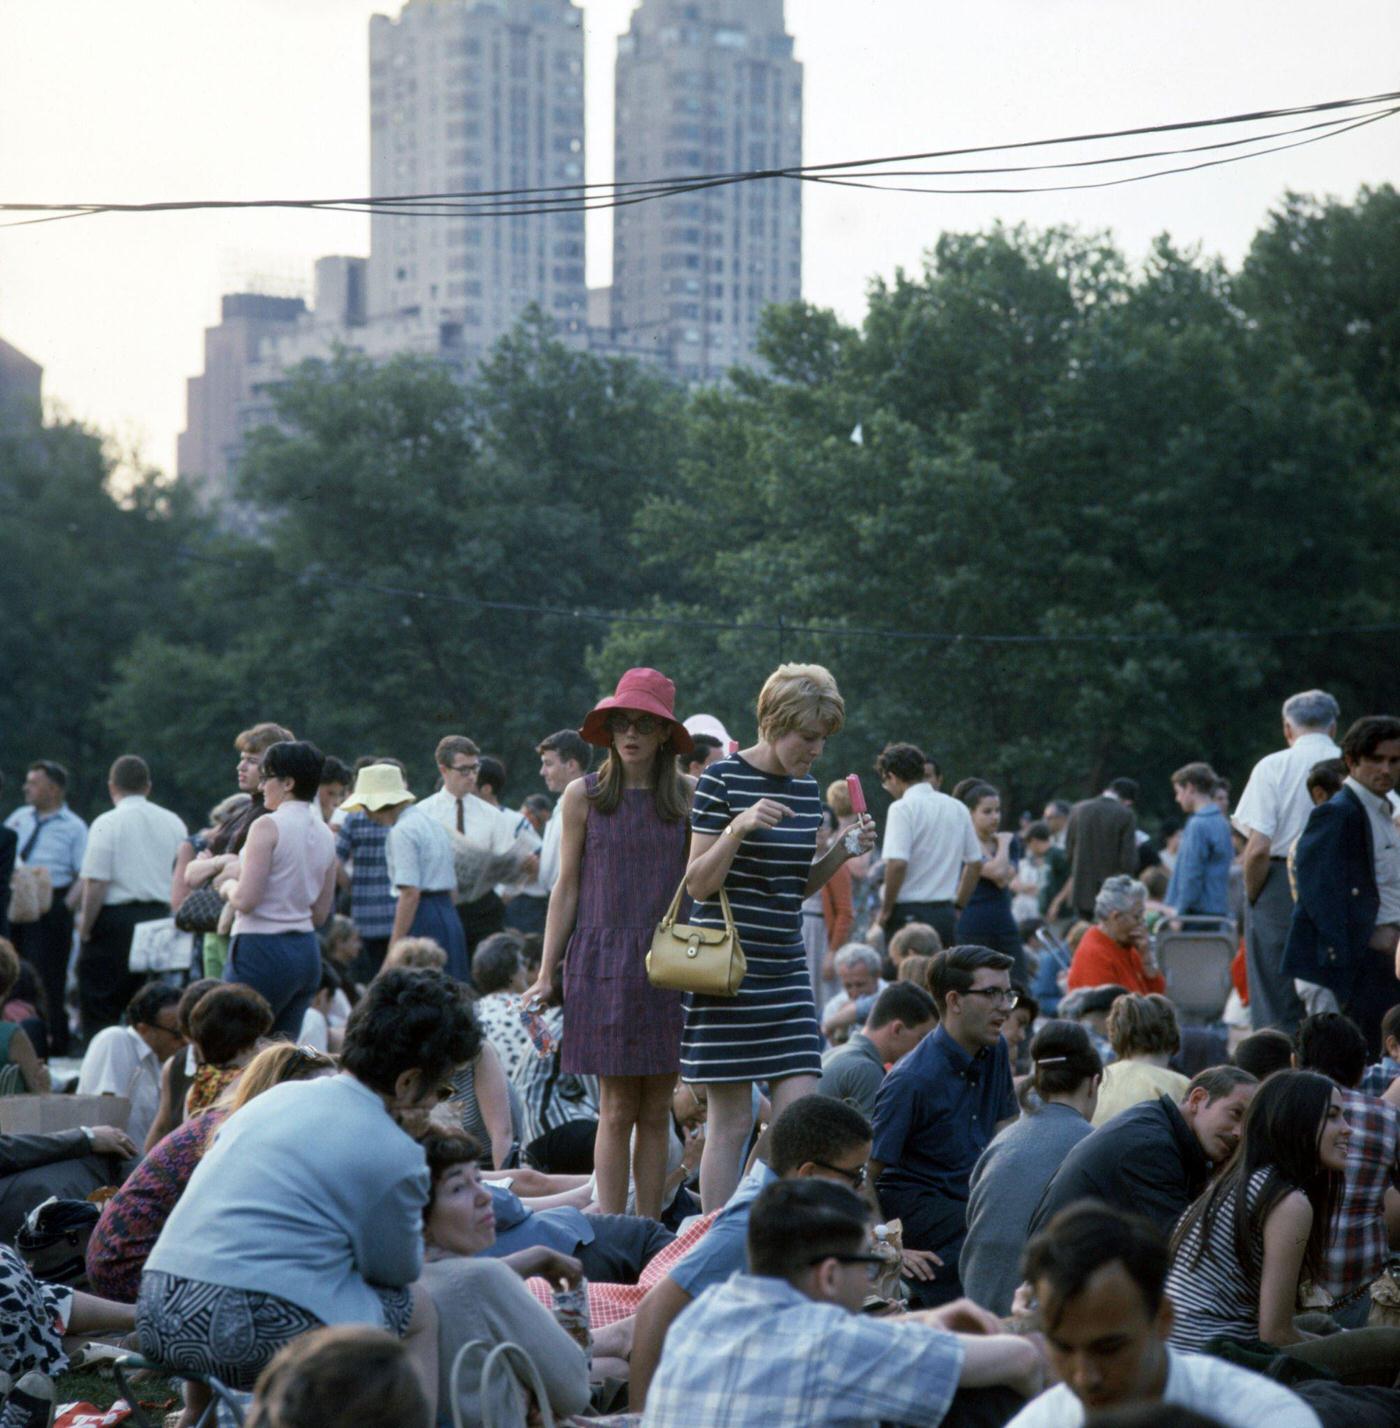 Fans Gather At Sheep Meadow In Central Park For Barbara Streisand Concert, Manhattan, 1967